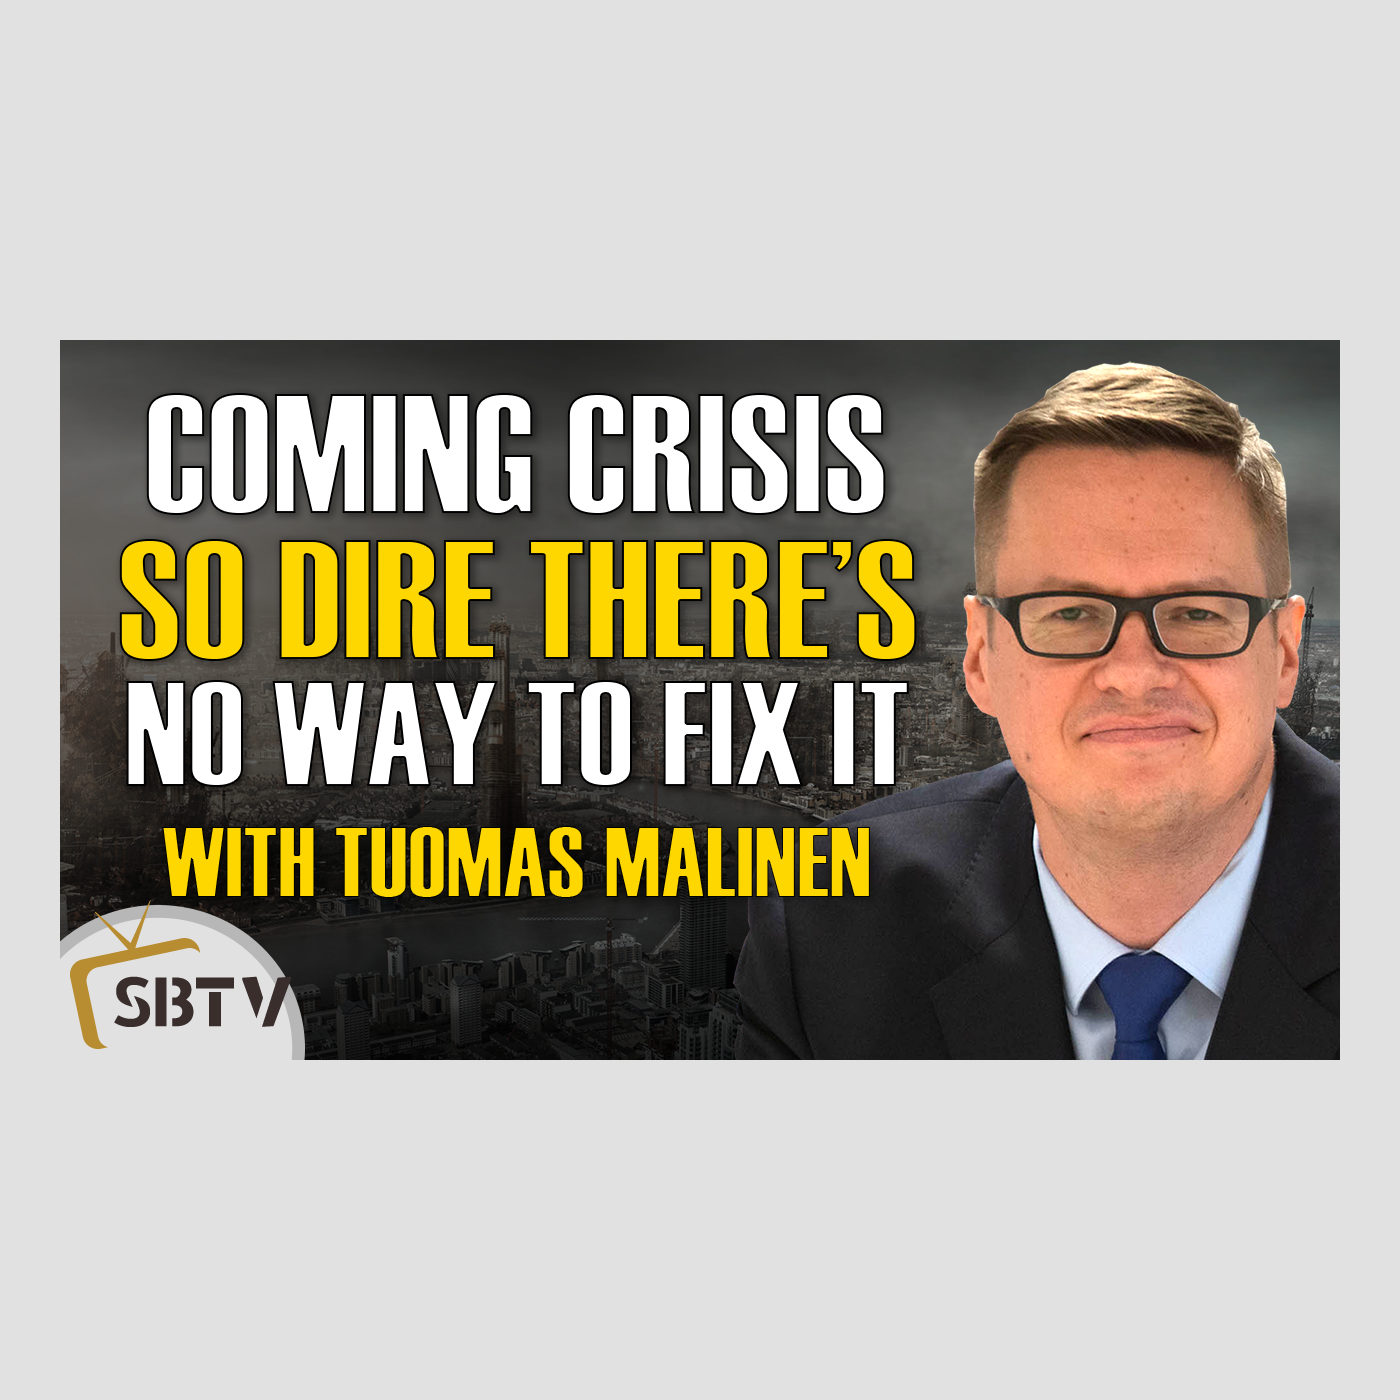 92 Tuomas Malinen - Coming Crisis Is So Dire There's No Fix For It, Hold Gold, Cash and Pay Down Debt